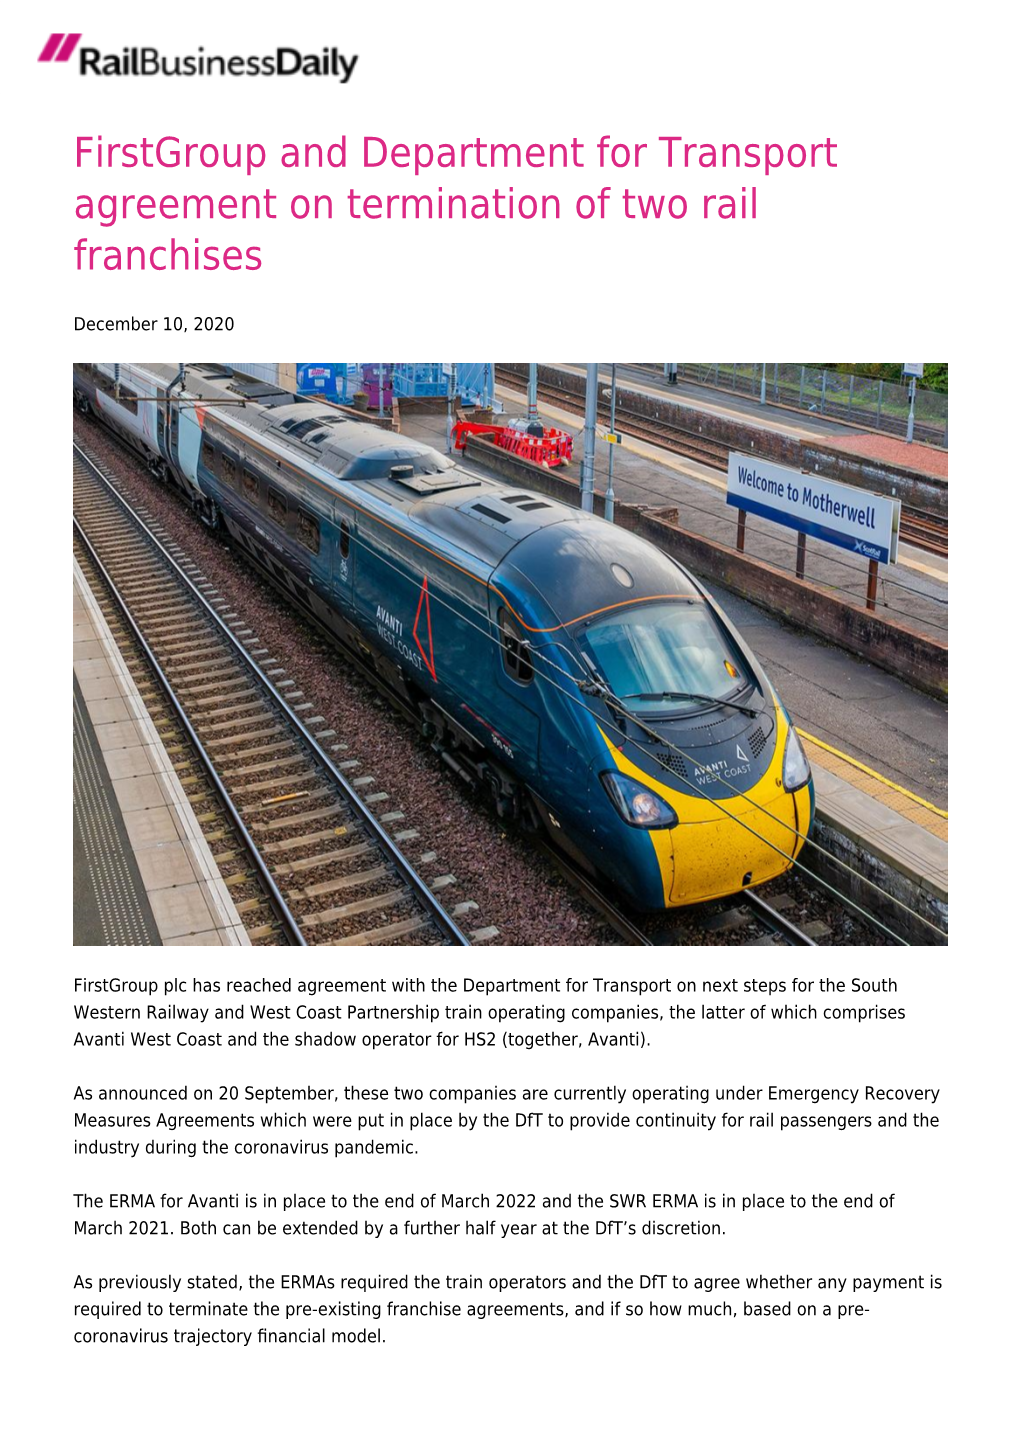 Firstgroup and Department for Transport Agreement on Termination of Two Rail Franchises